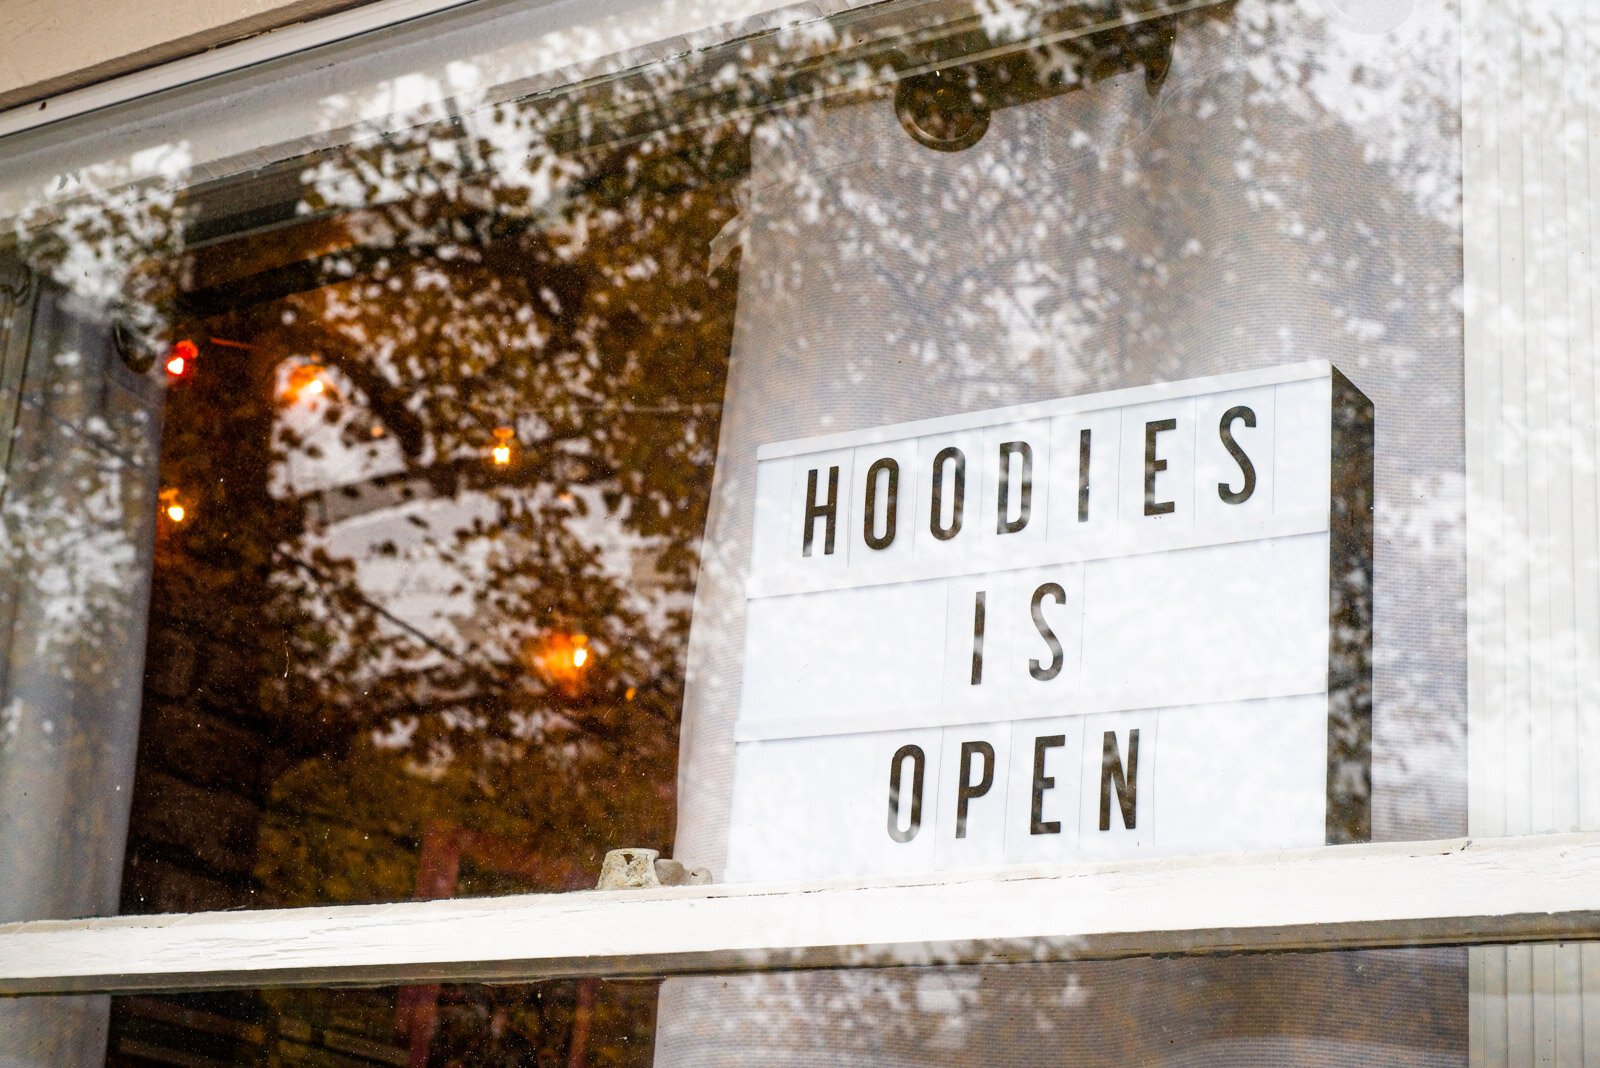 The sign in the window of Hoodies.